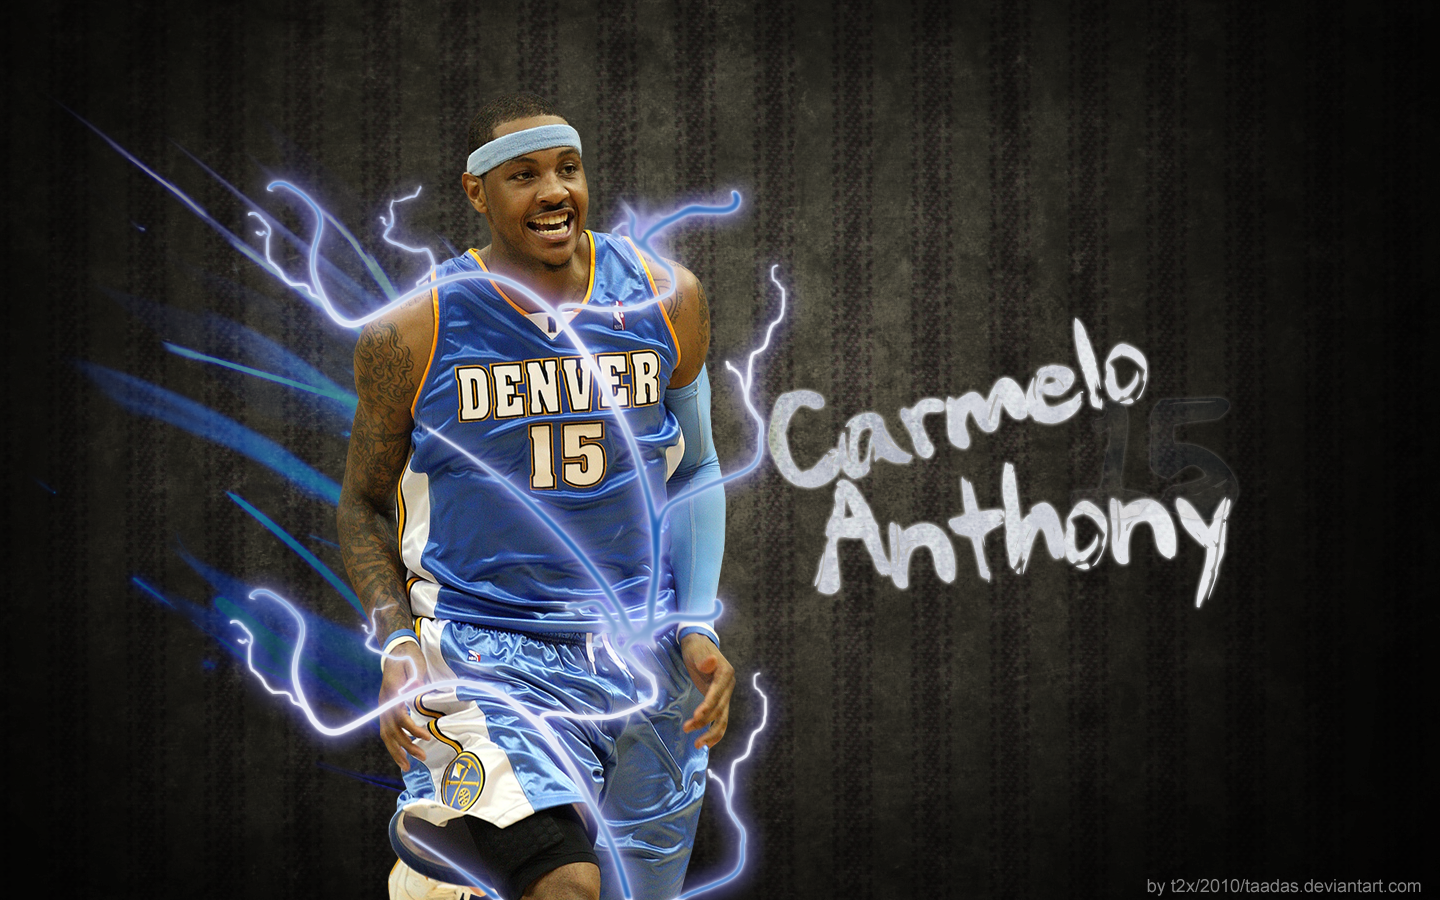 All Sports Club Carmelo Anthony hd New Wallpapers 2012 1440x900